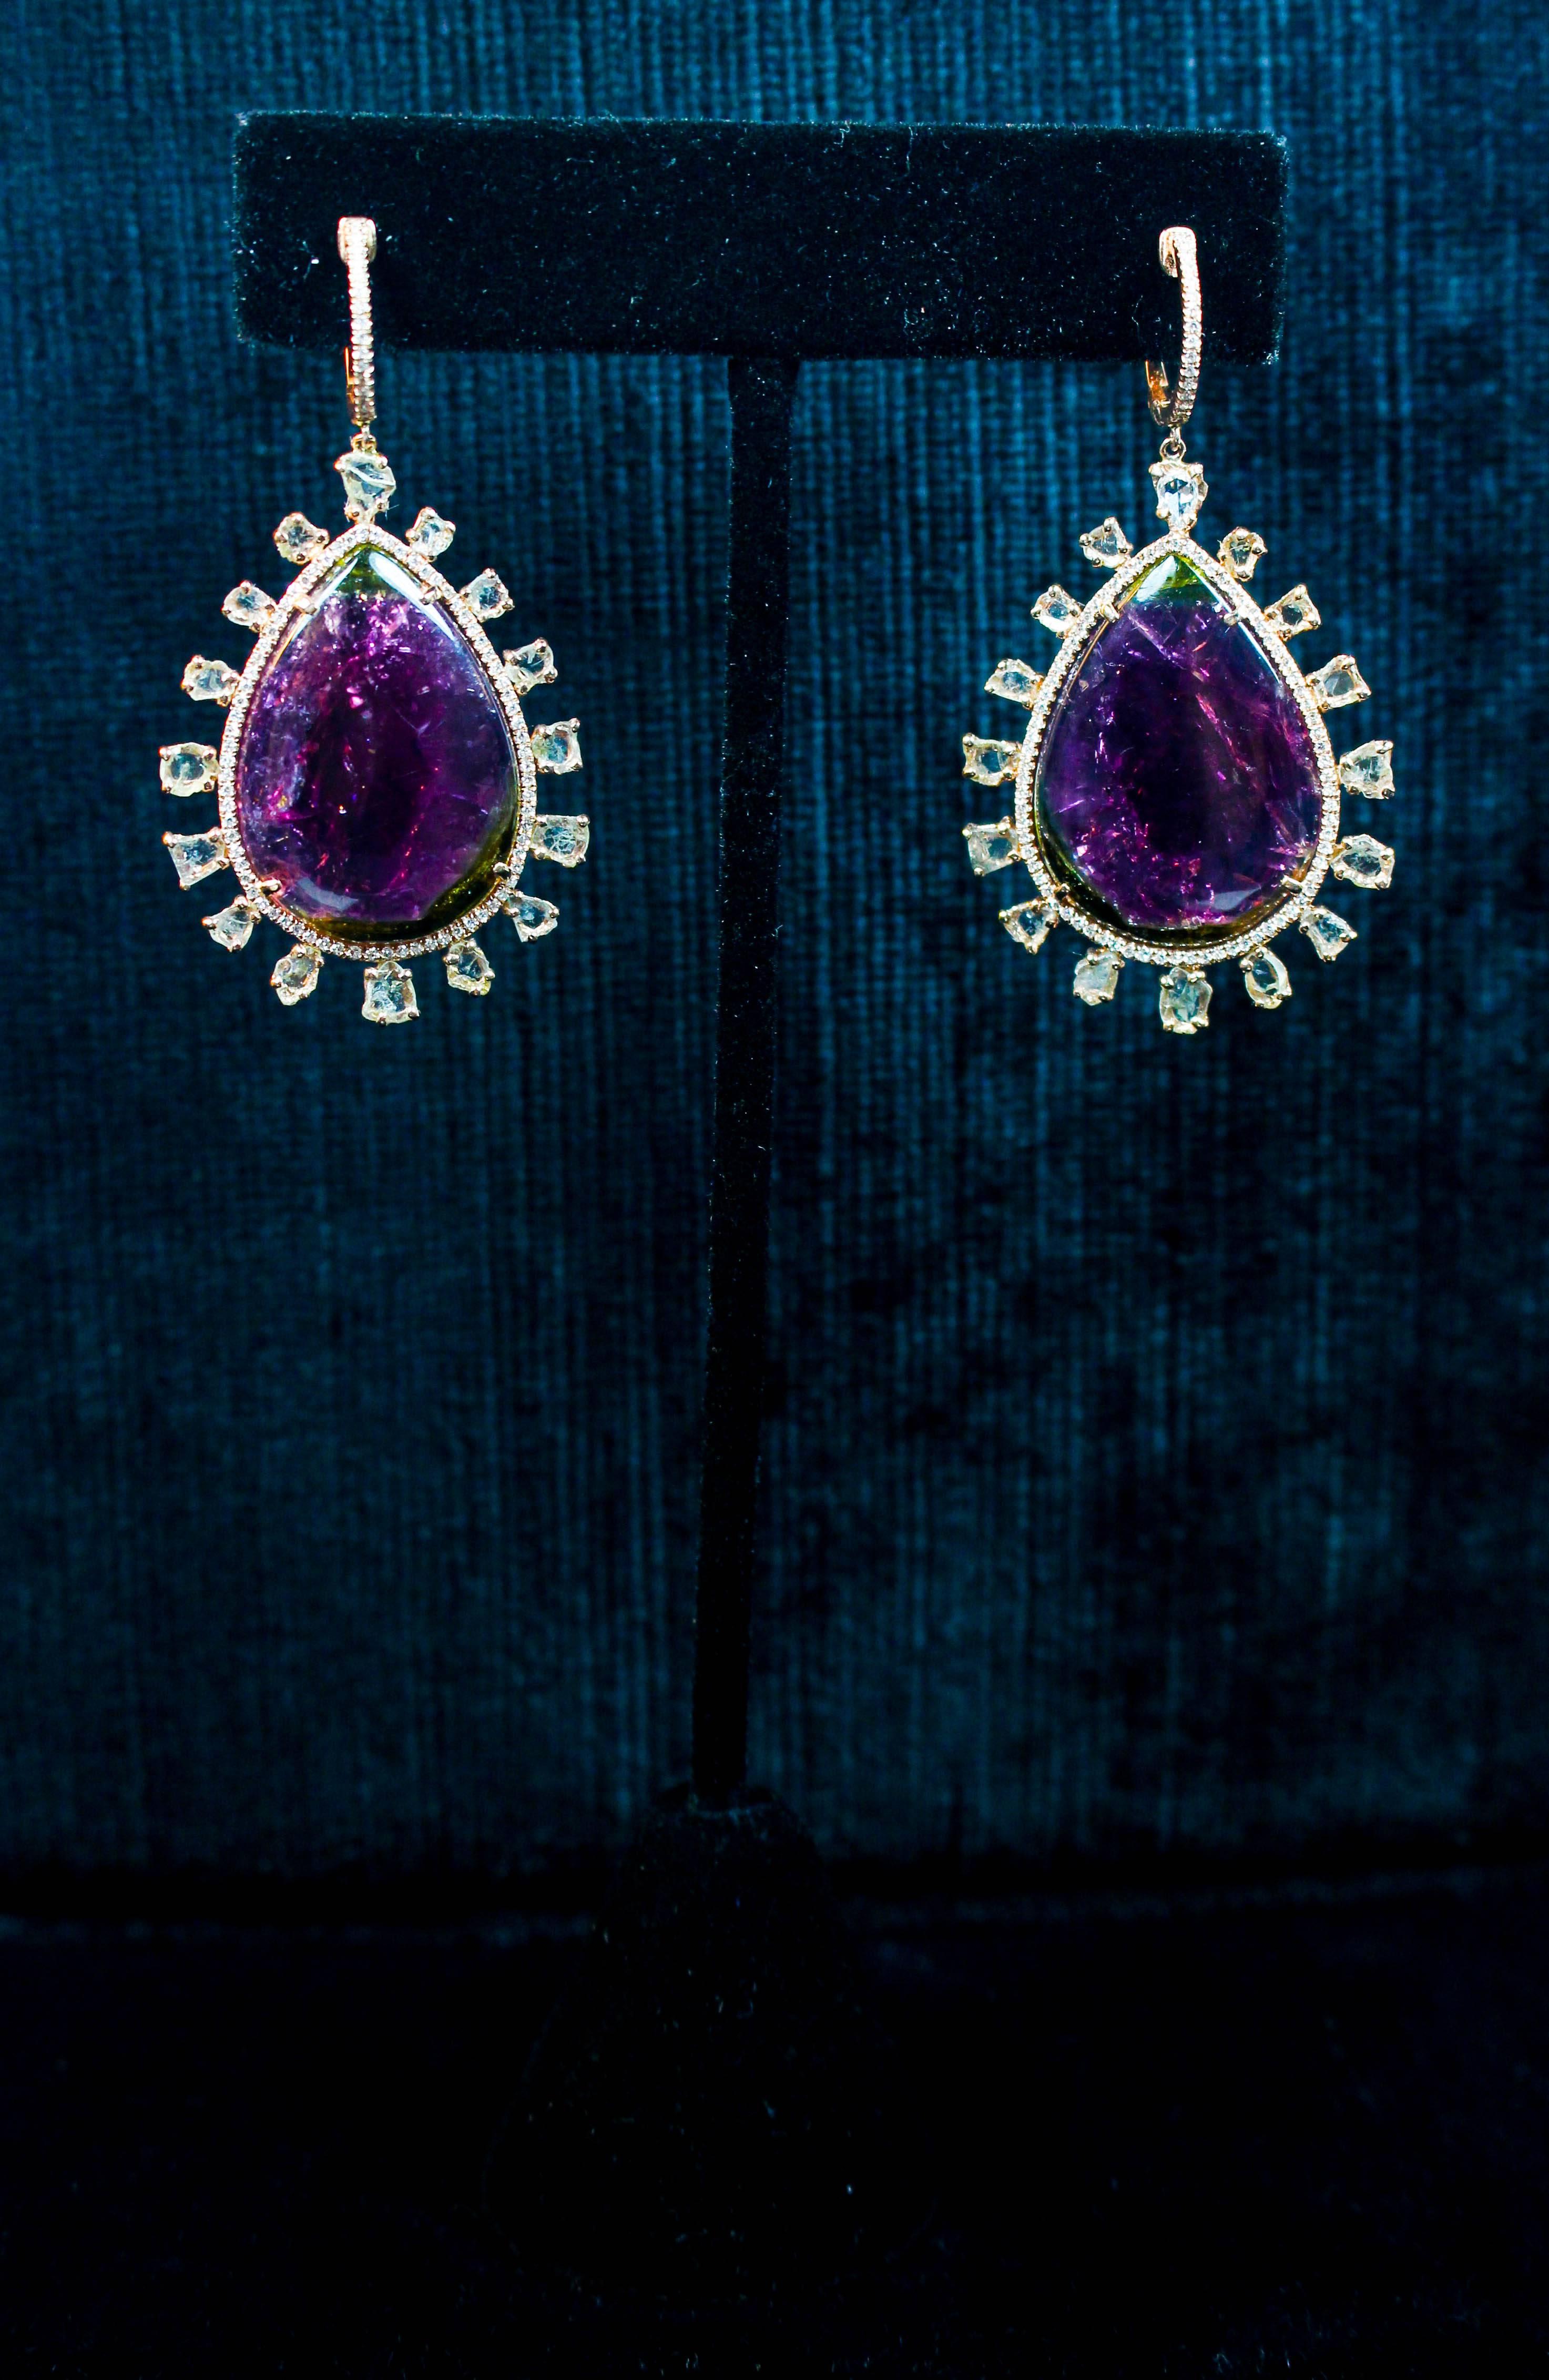 These earrings are composed of rose gold with large sliced purple tourmaline and diamond accenting. Absolutely stunning design. Specs below. In excellent condition.

Please feel free to ask any questions you may have, we are happy to assist.